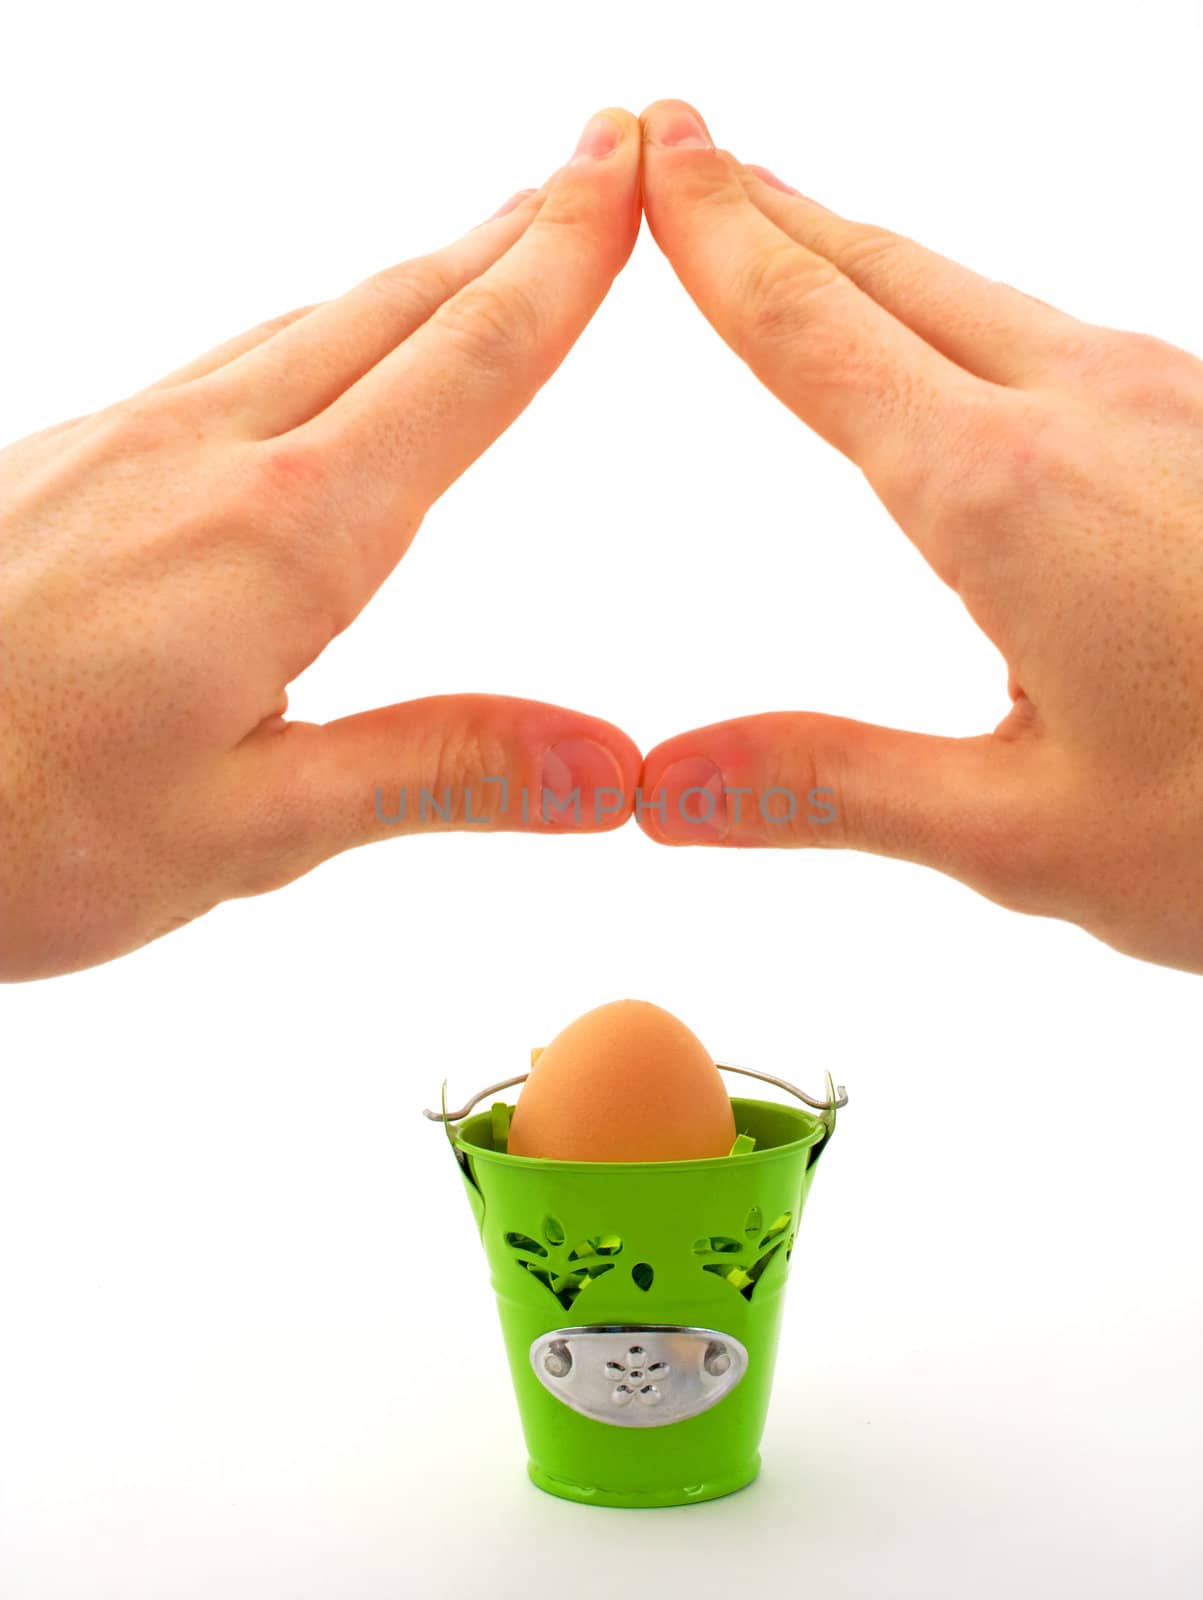 Hands making roof for protection, over egg in basket, on white background.